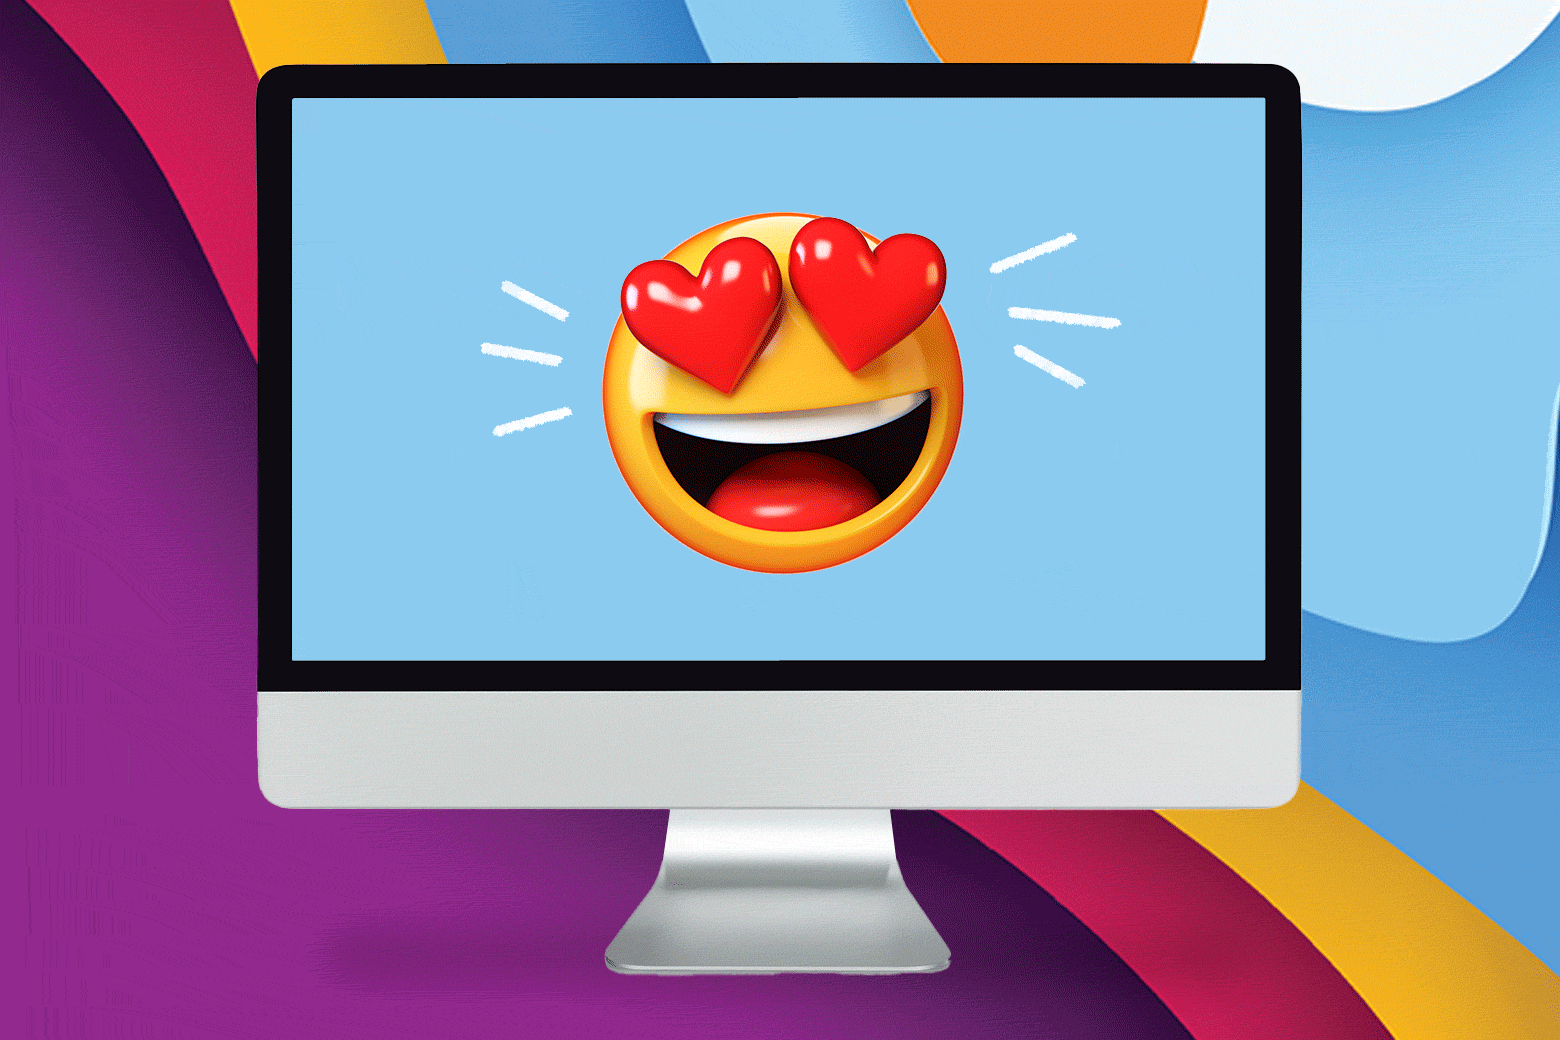 Set on a purple, pink, yellow, and blue background, a smiling heart-eyes emoji moves back and forth on a blank screen of an external monitor.